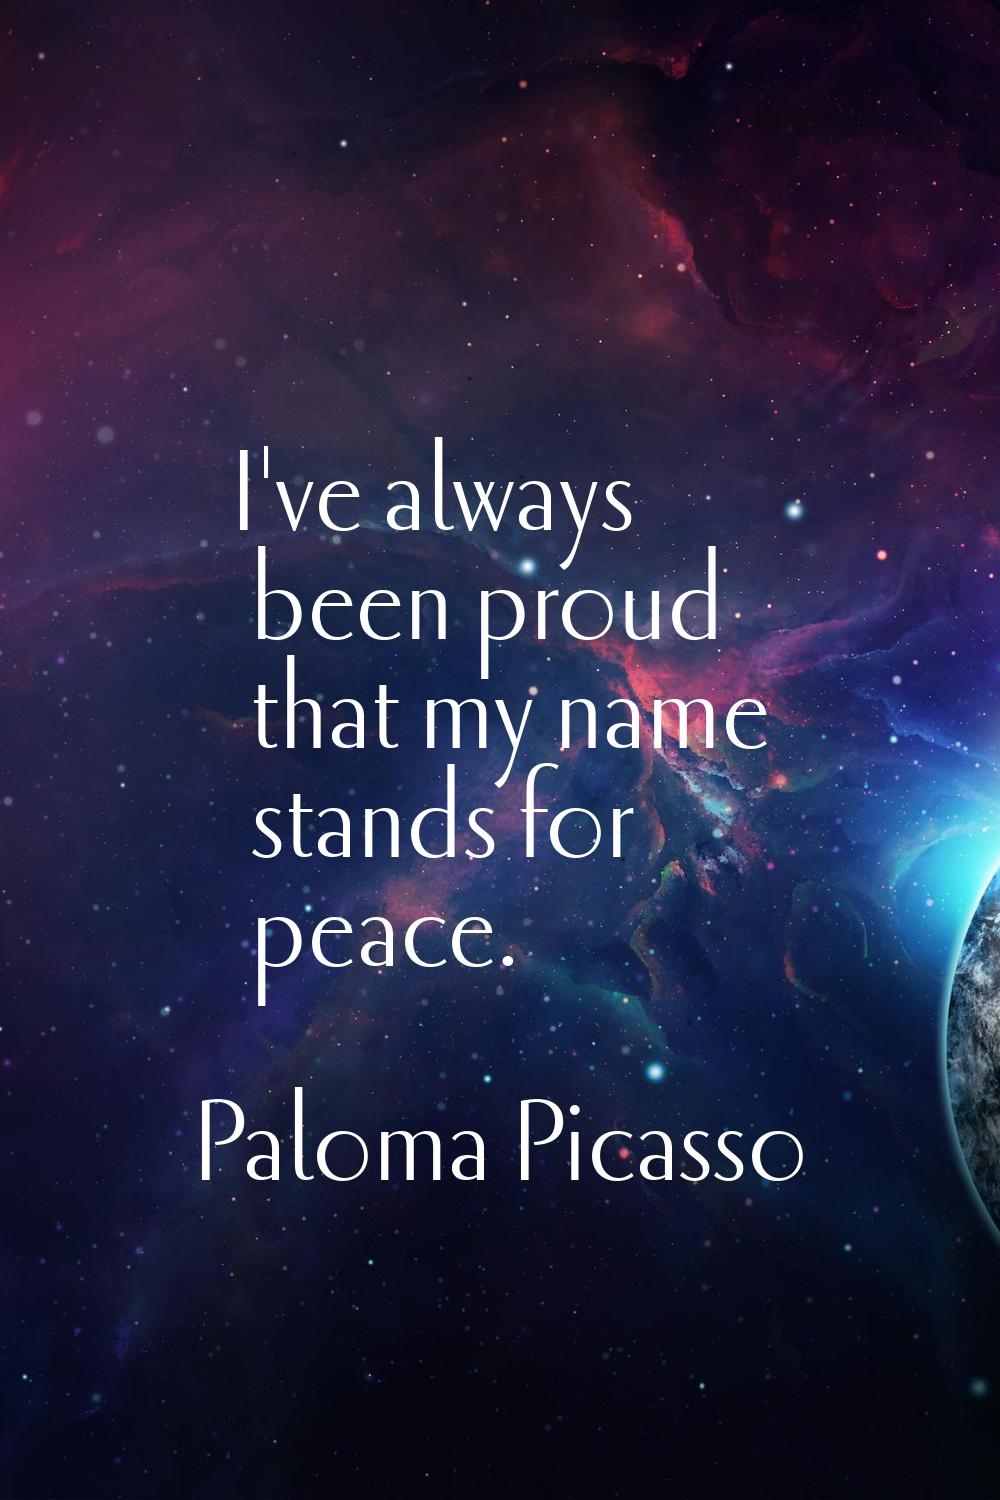 I've always been proud that my name stands for peace.